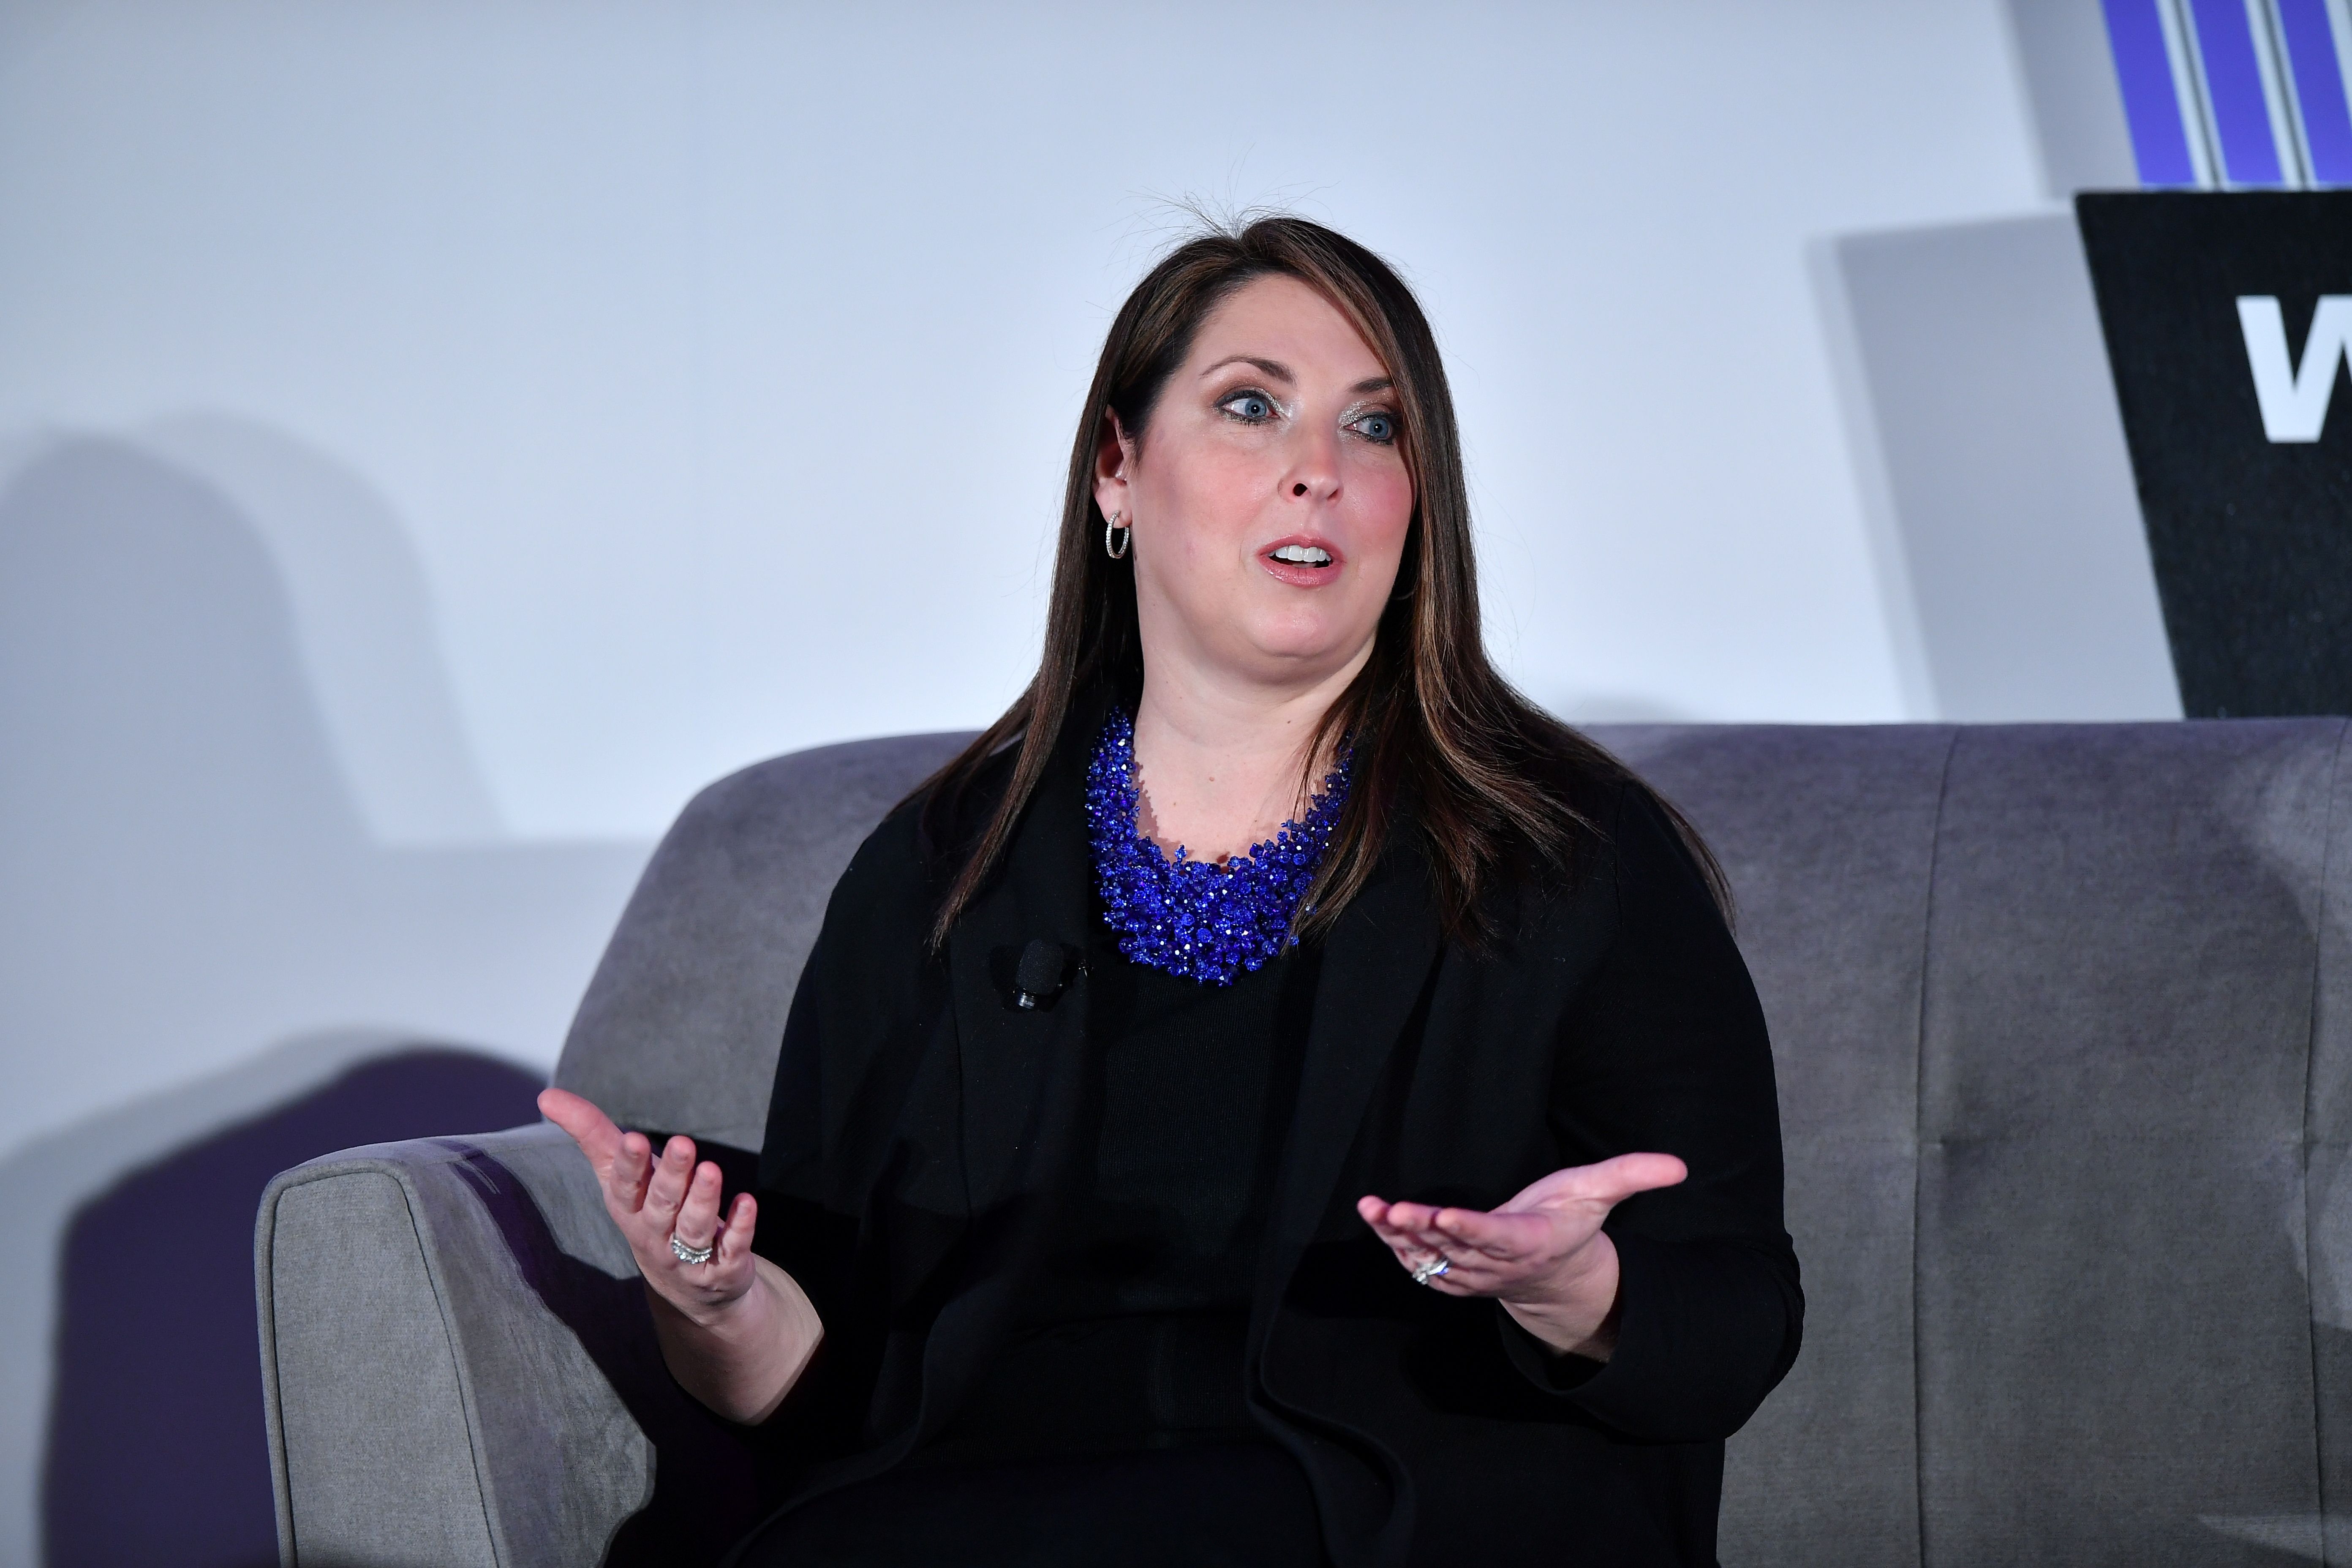 Ronna McDaniel, Chairwoman of the Republican National Committee speaks during the 6th Annual Women Rule Summit at a hotel in Washington, DC on December 11, 2018. (MANDEL NGAN/AFP/Getty Images)